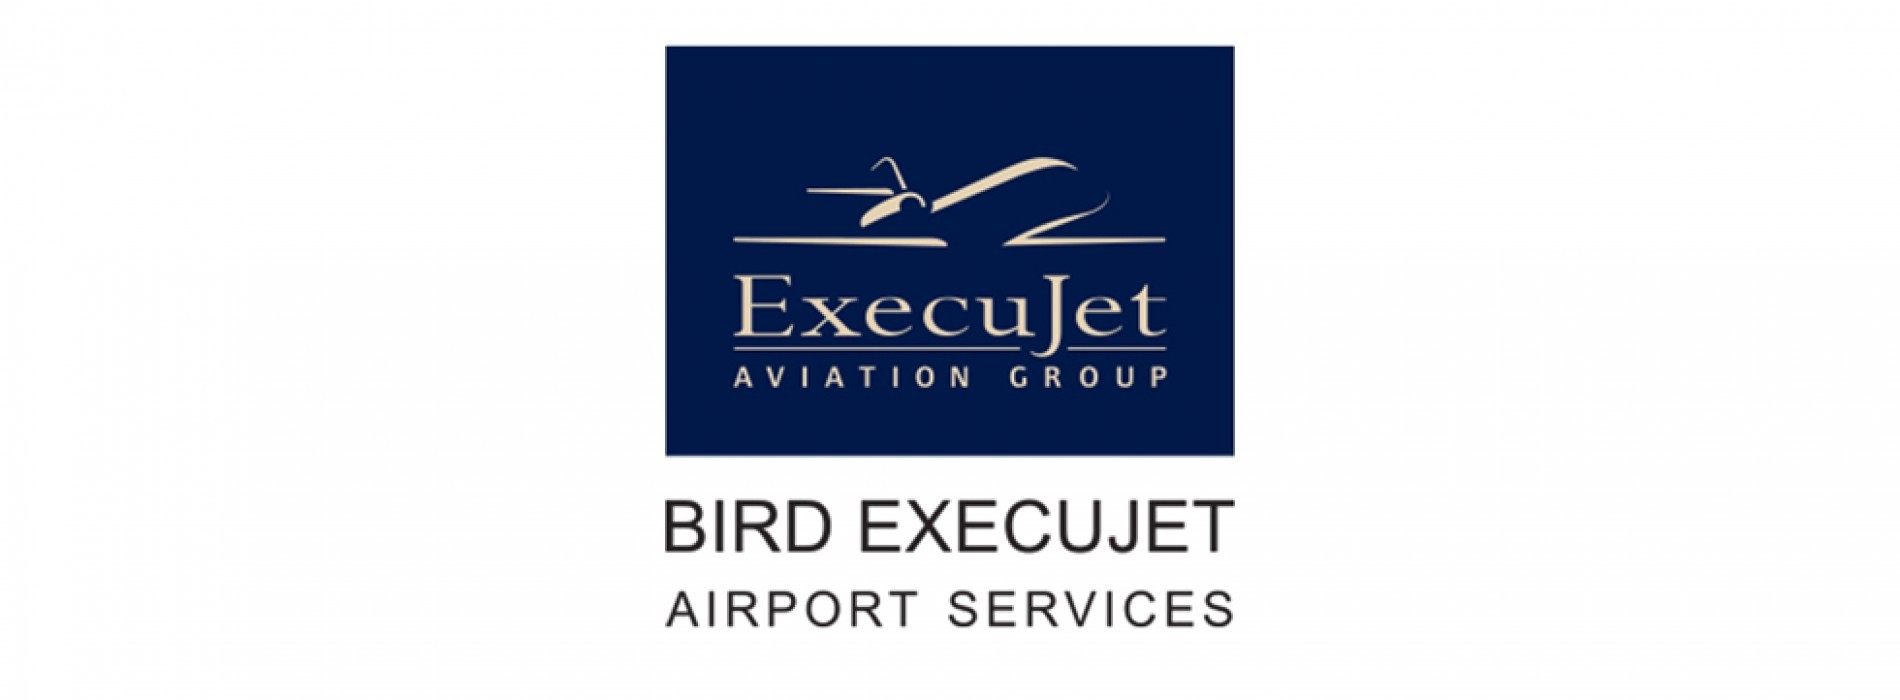 Textron Aviation appoints Bird Execujet as its authorized service facility